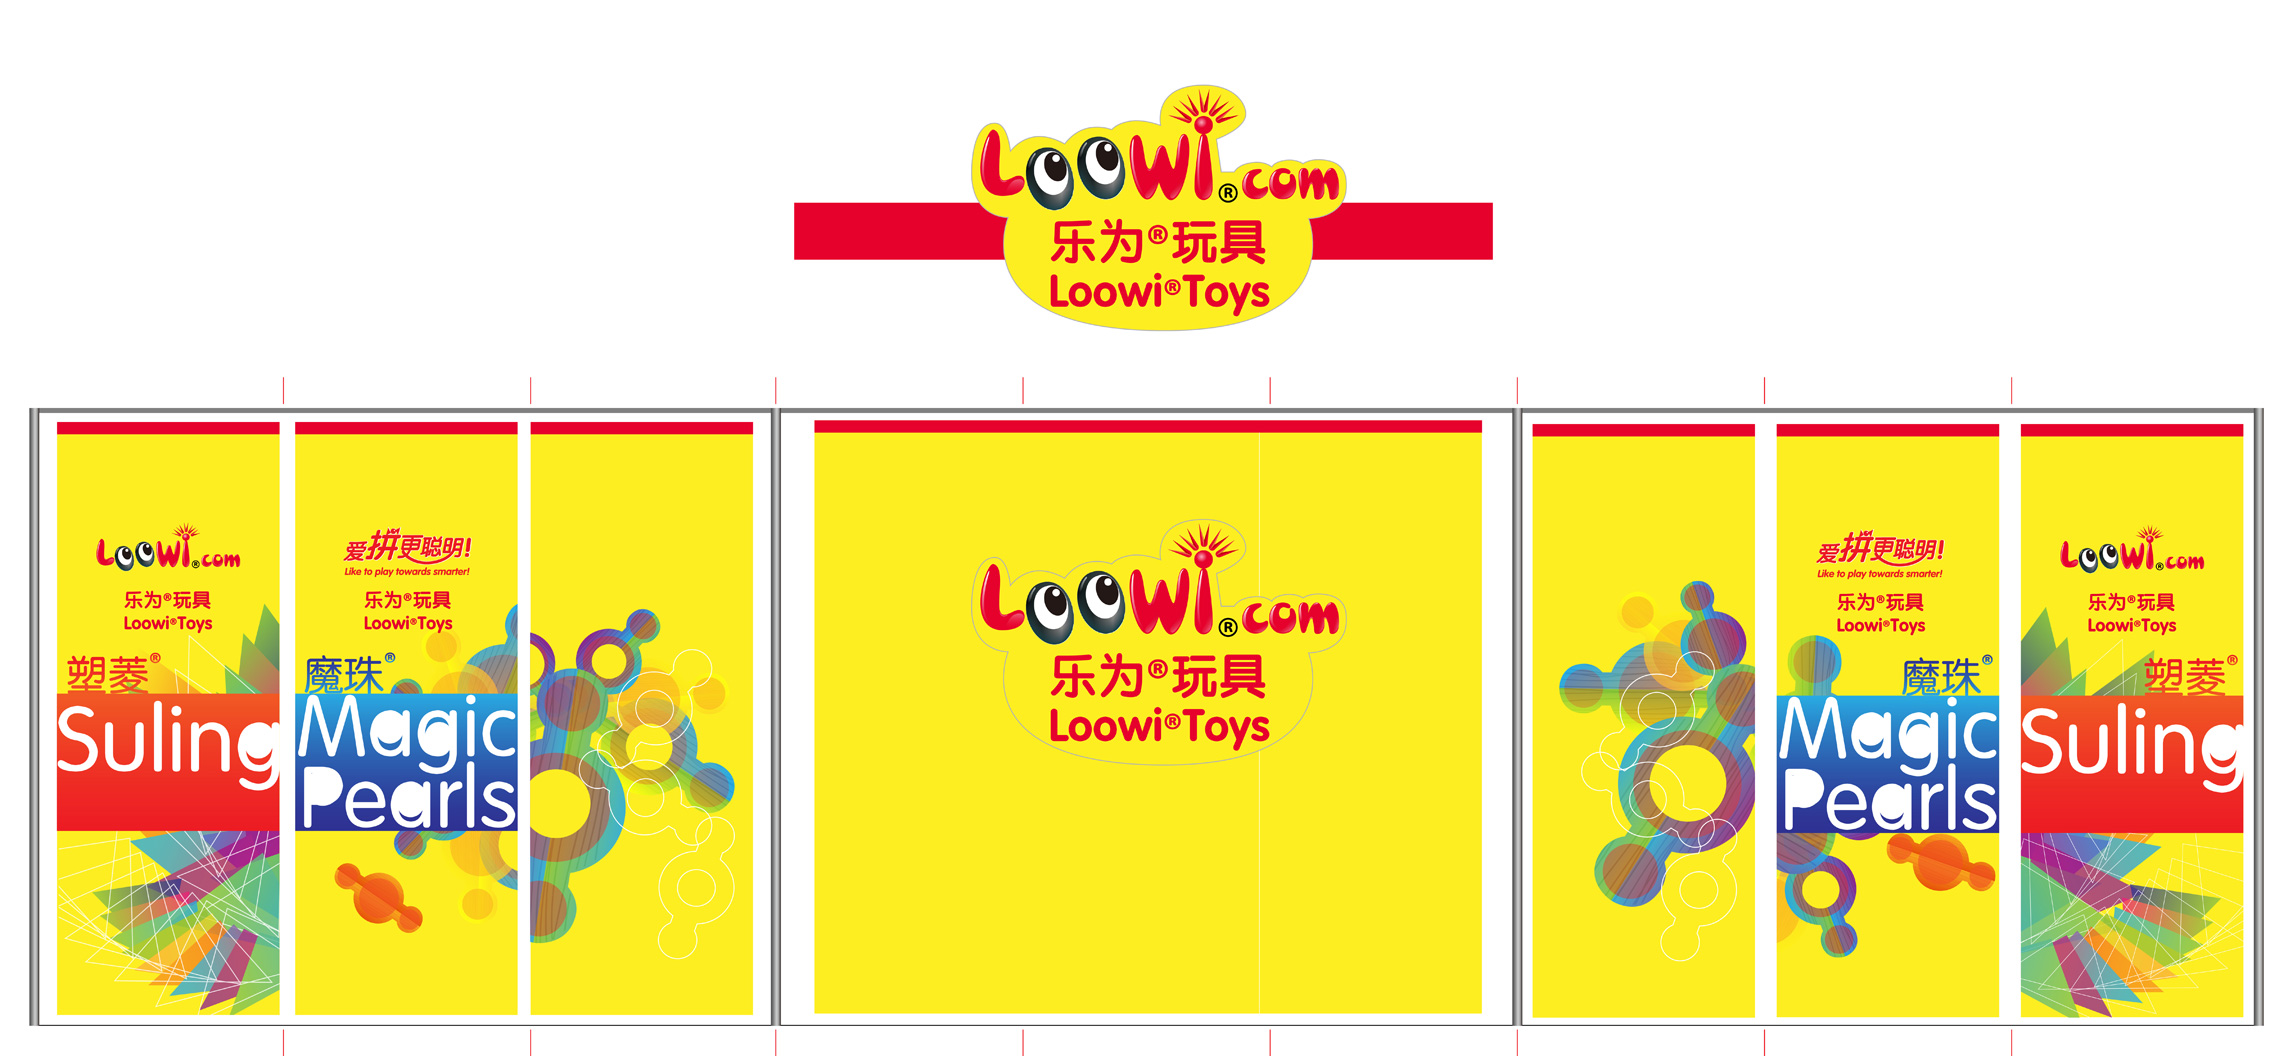 Loowi, ChinaToy Expo, Oct. 12-14, 2011, Shanghai, New Int'l Expo Center, Booth 5A23